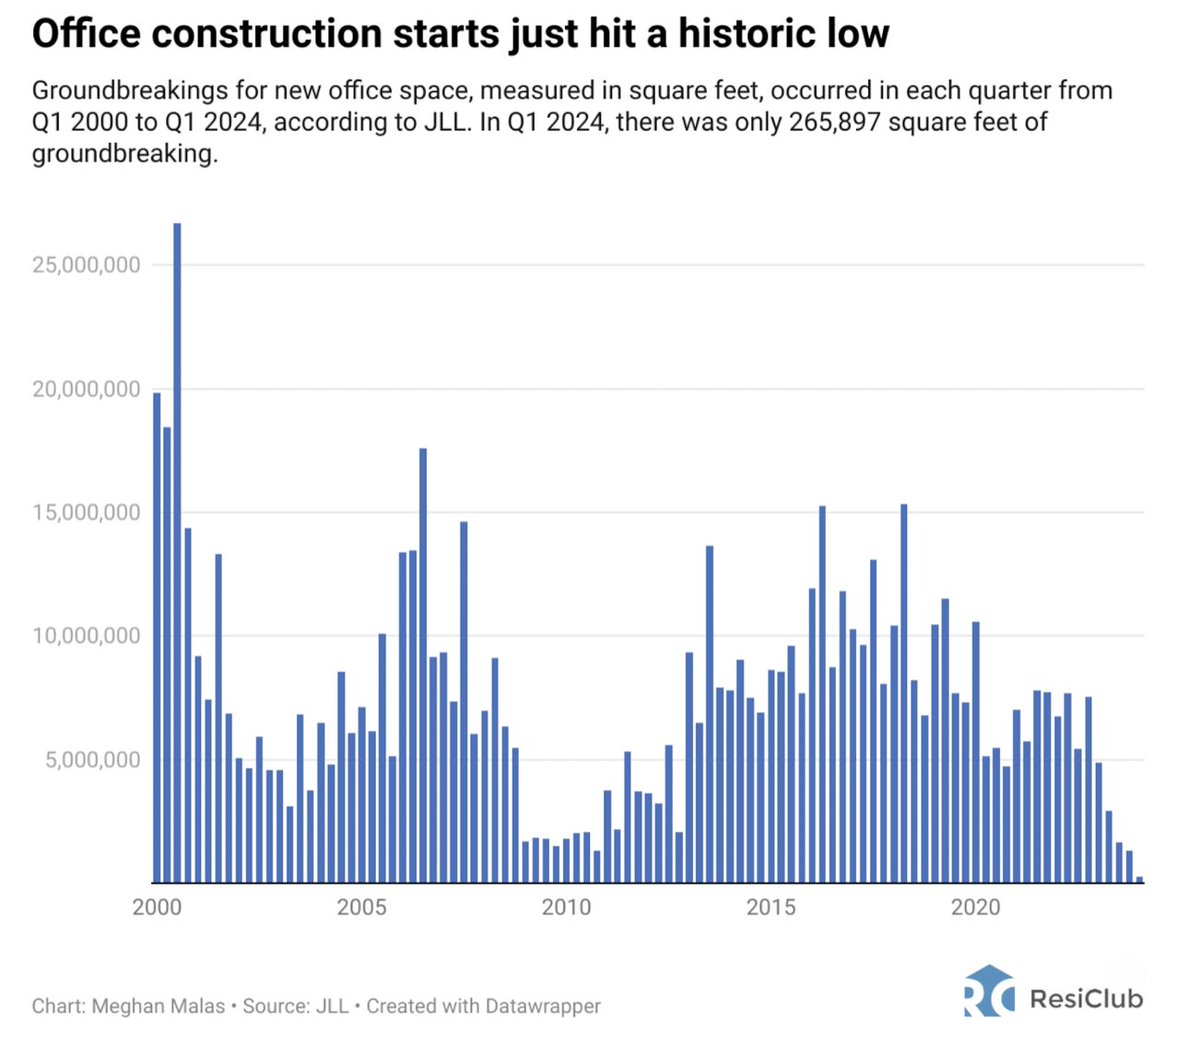 New office construction falls to all-time low 🚨